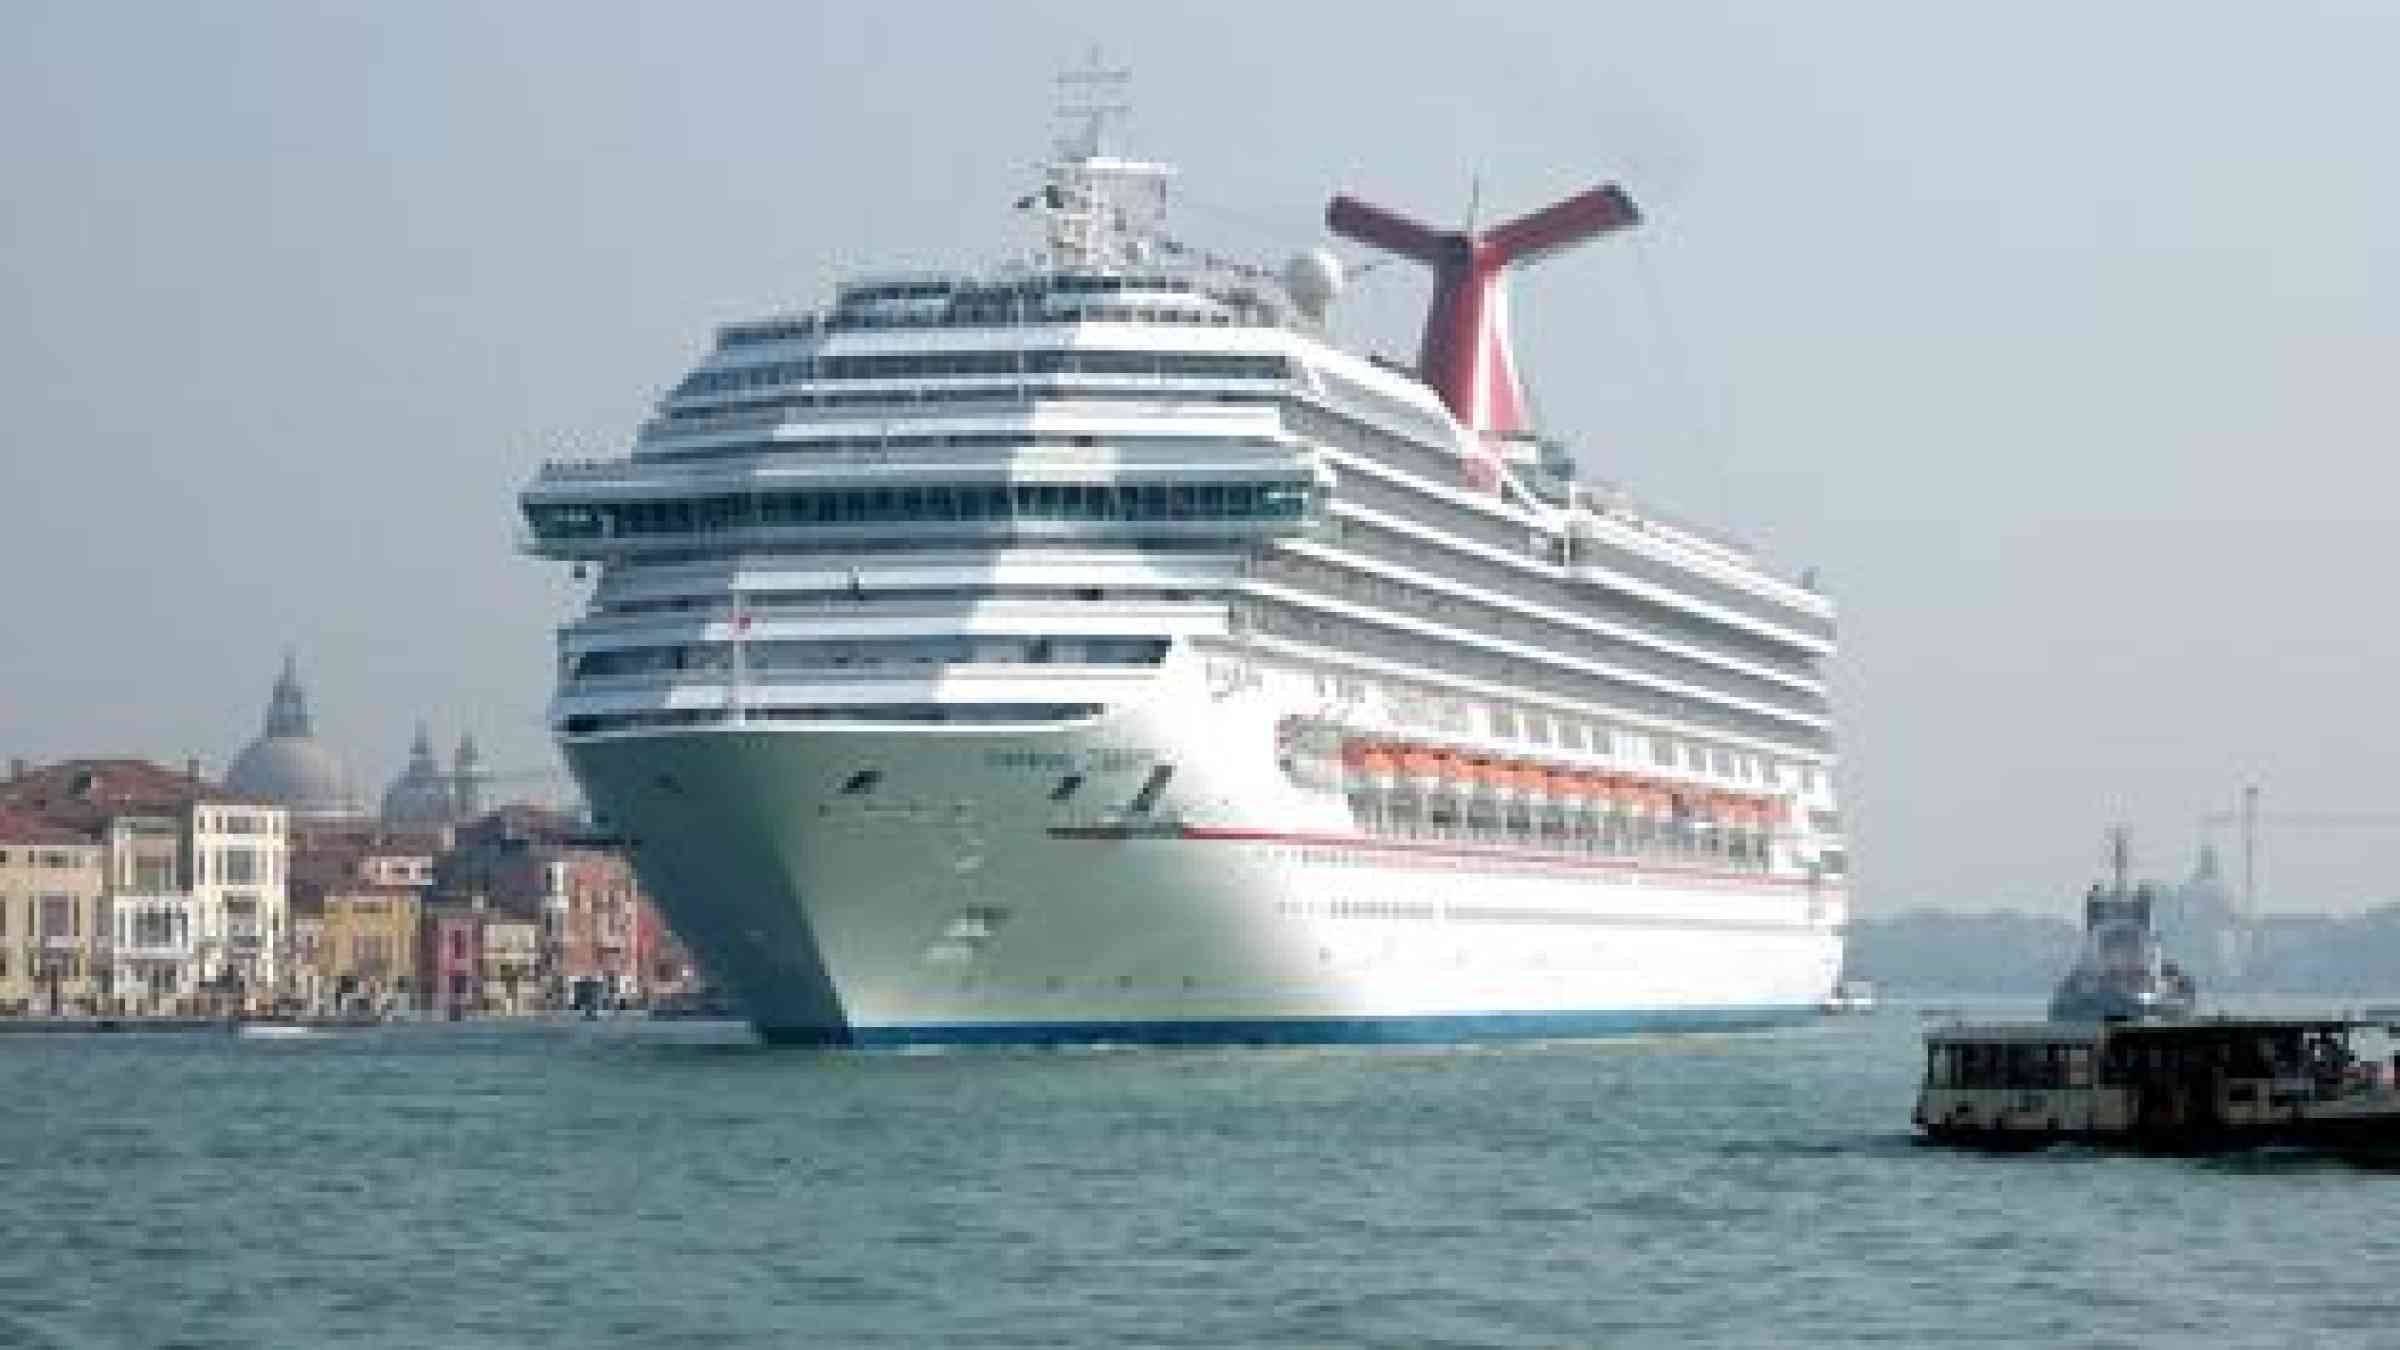 Large cruise ships are believed to be hazardous to the long-term resilience of Venice.